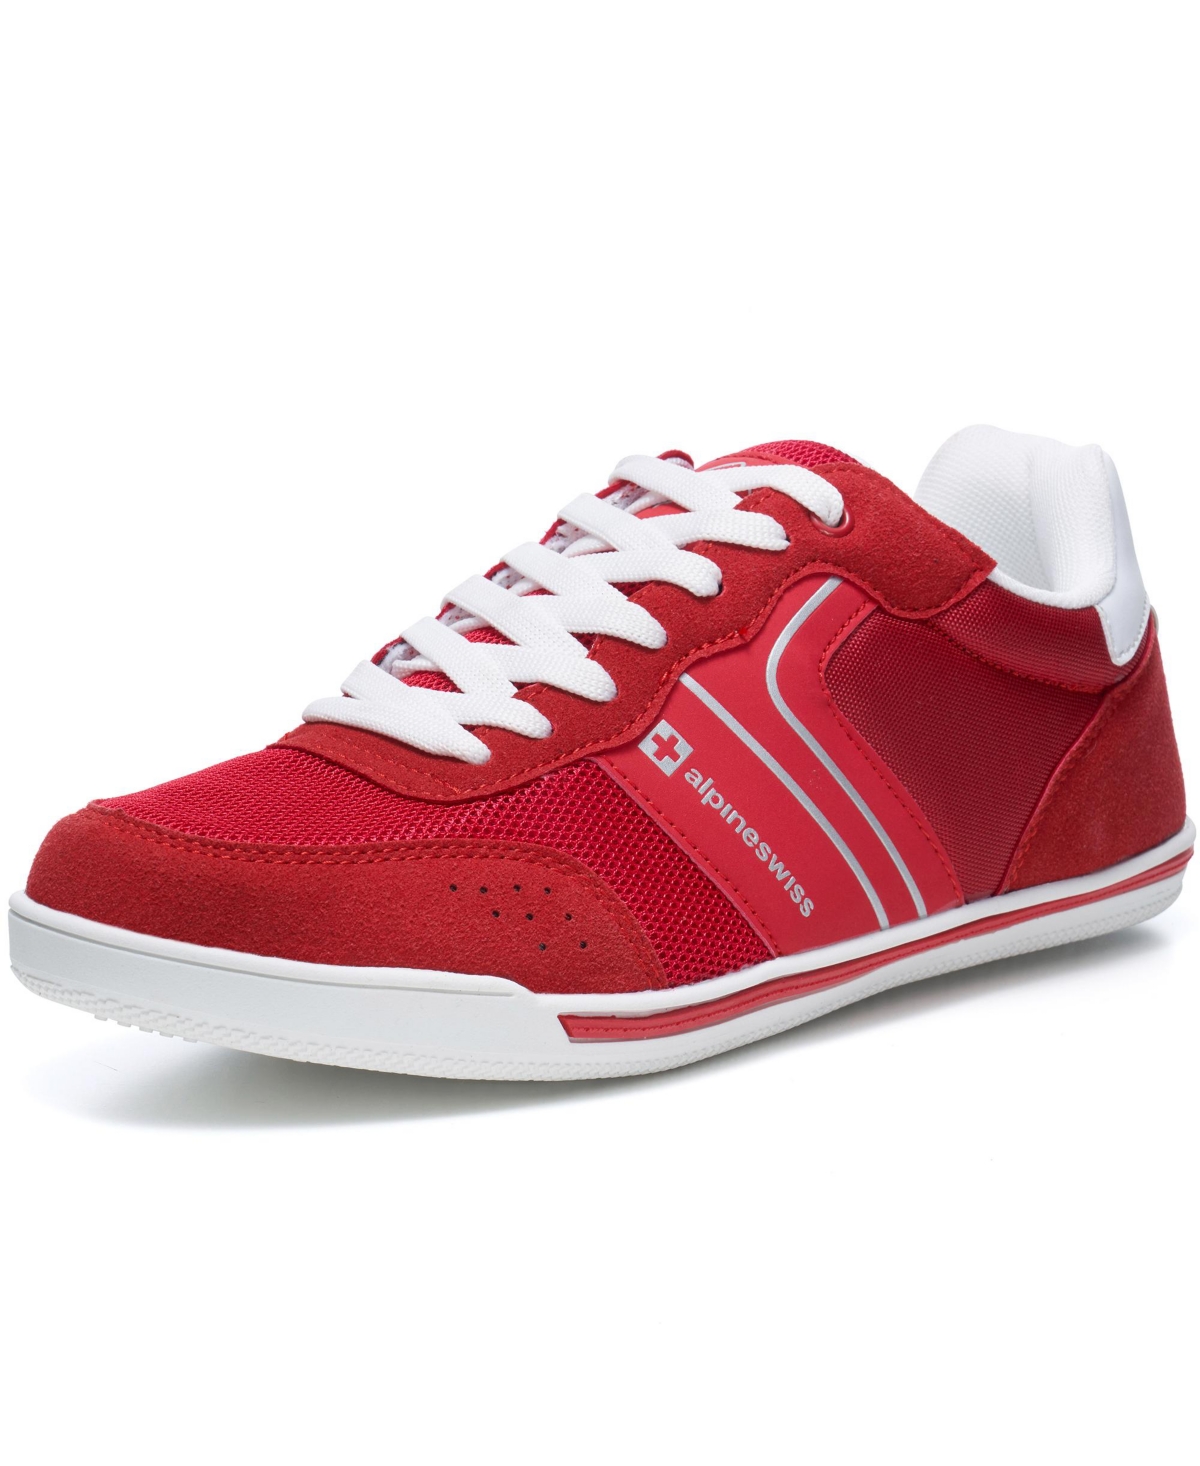 Men's Liam Fashion Sneakers Suede Trim Low Top Lace Up Tennis Shoes - Red